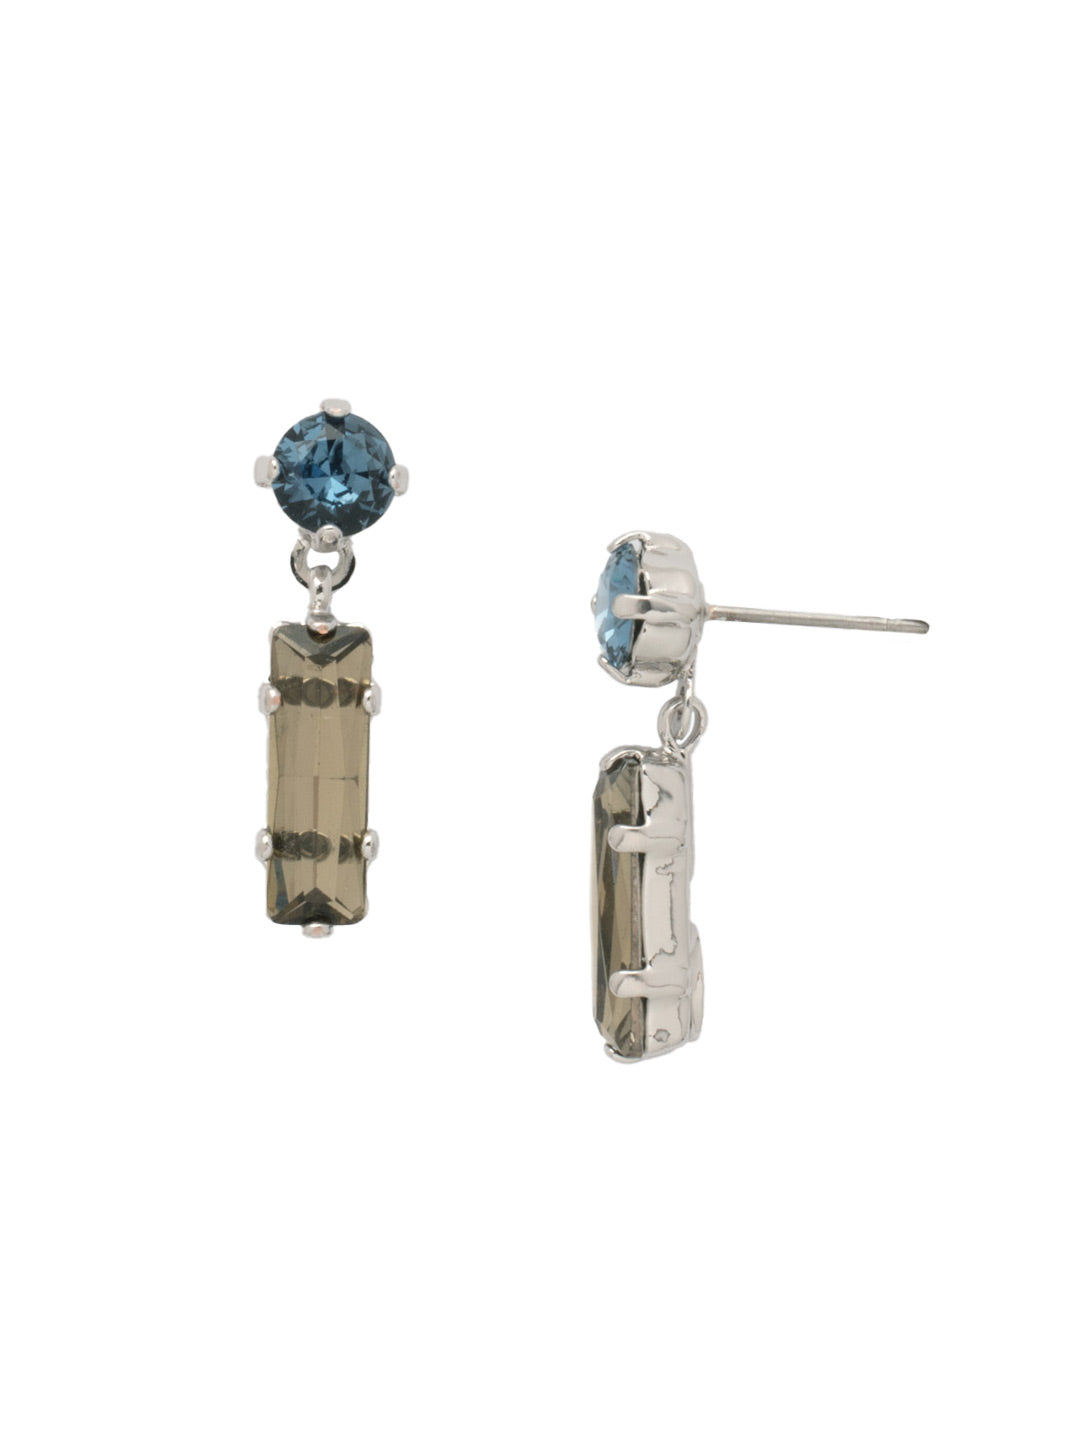 Bindi Studded Dangle Earrings - EFL13PDASP - <p>The Bindi Studded Dangle Earrings feature a baguette bar crystal dangling from a round crystal on a post. From Sorrelli's Aspen SKY collection in our Palladium finish.</p>